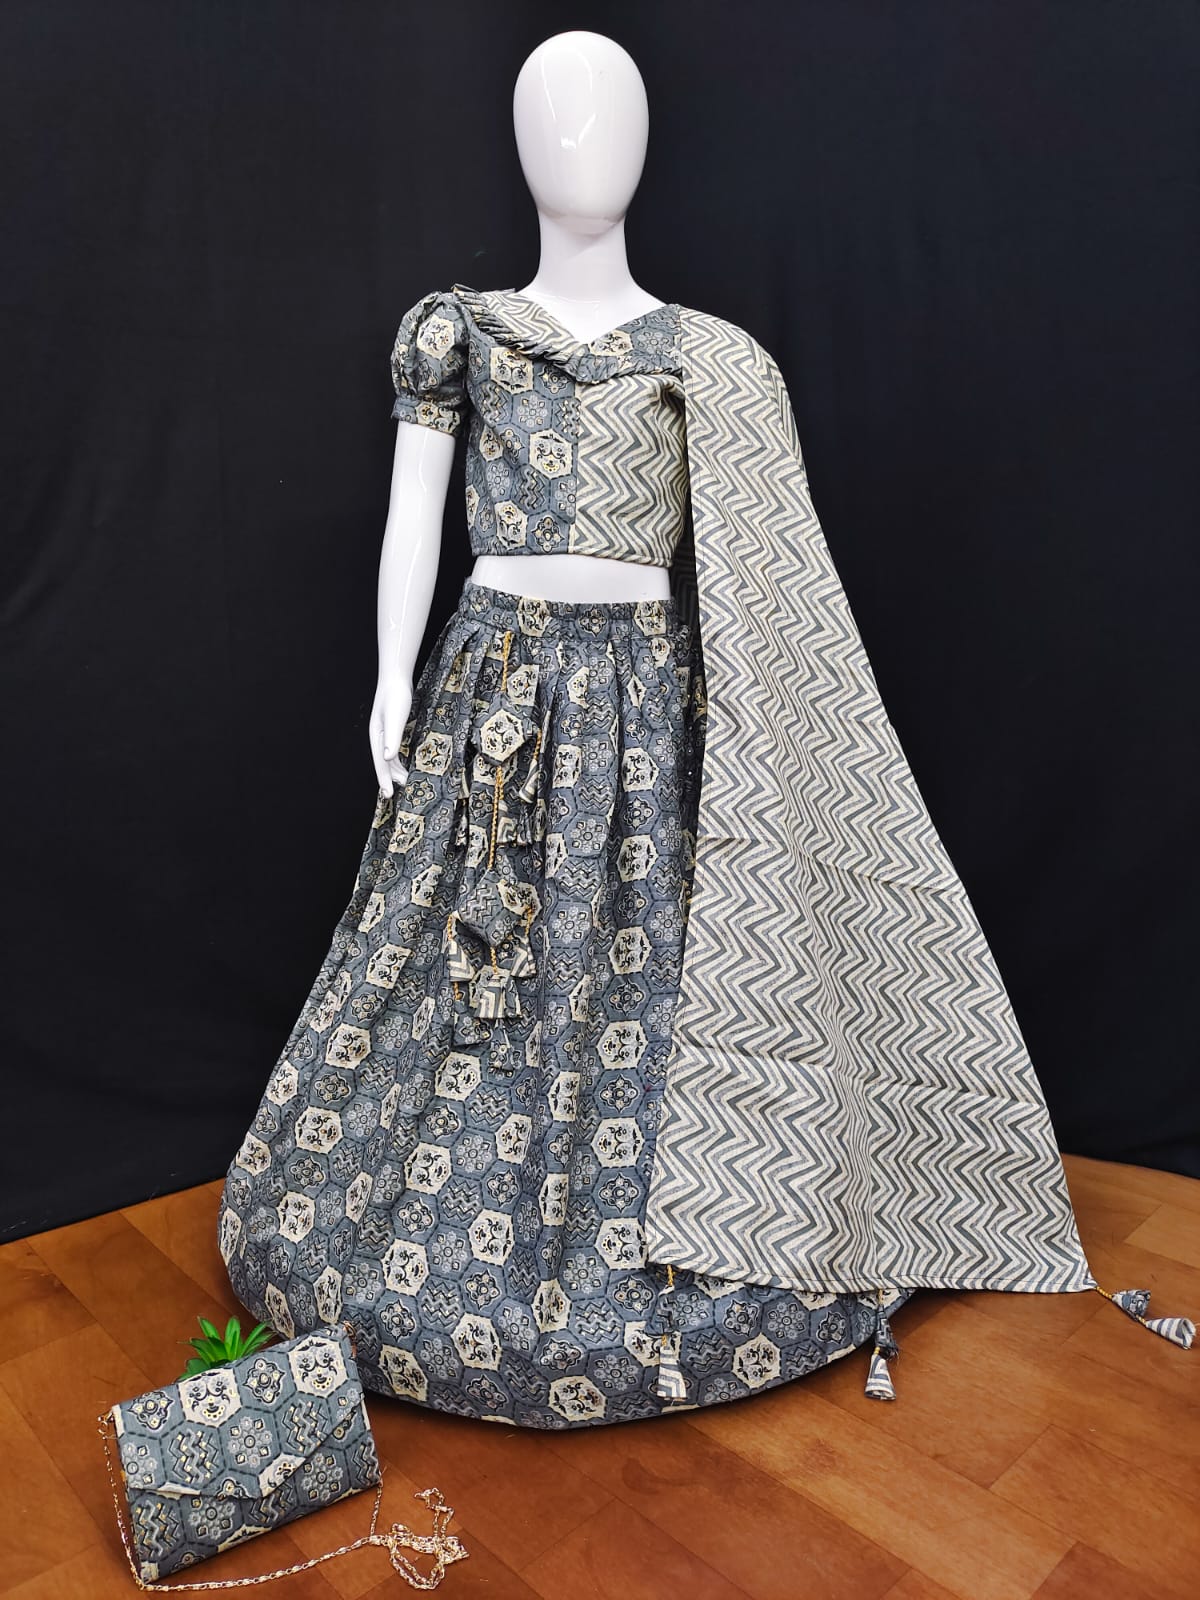 Kids Cotton Lehenga Choli with Matching Purse Anant Tex Exports Private Limited